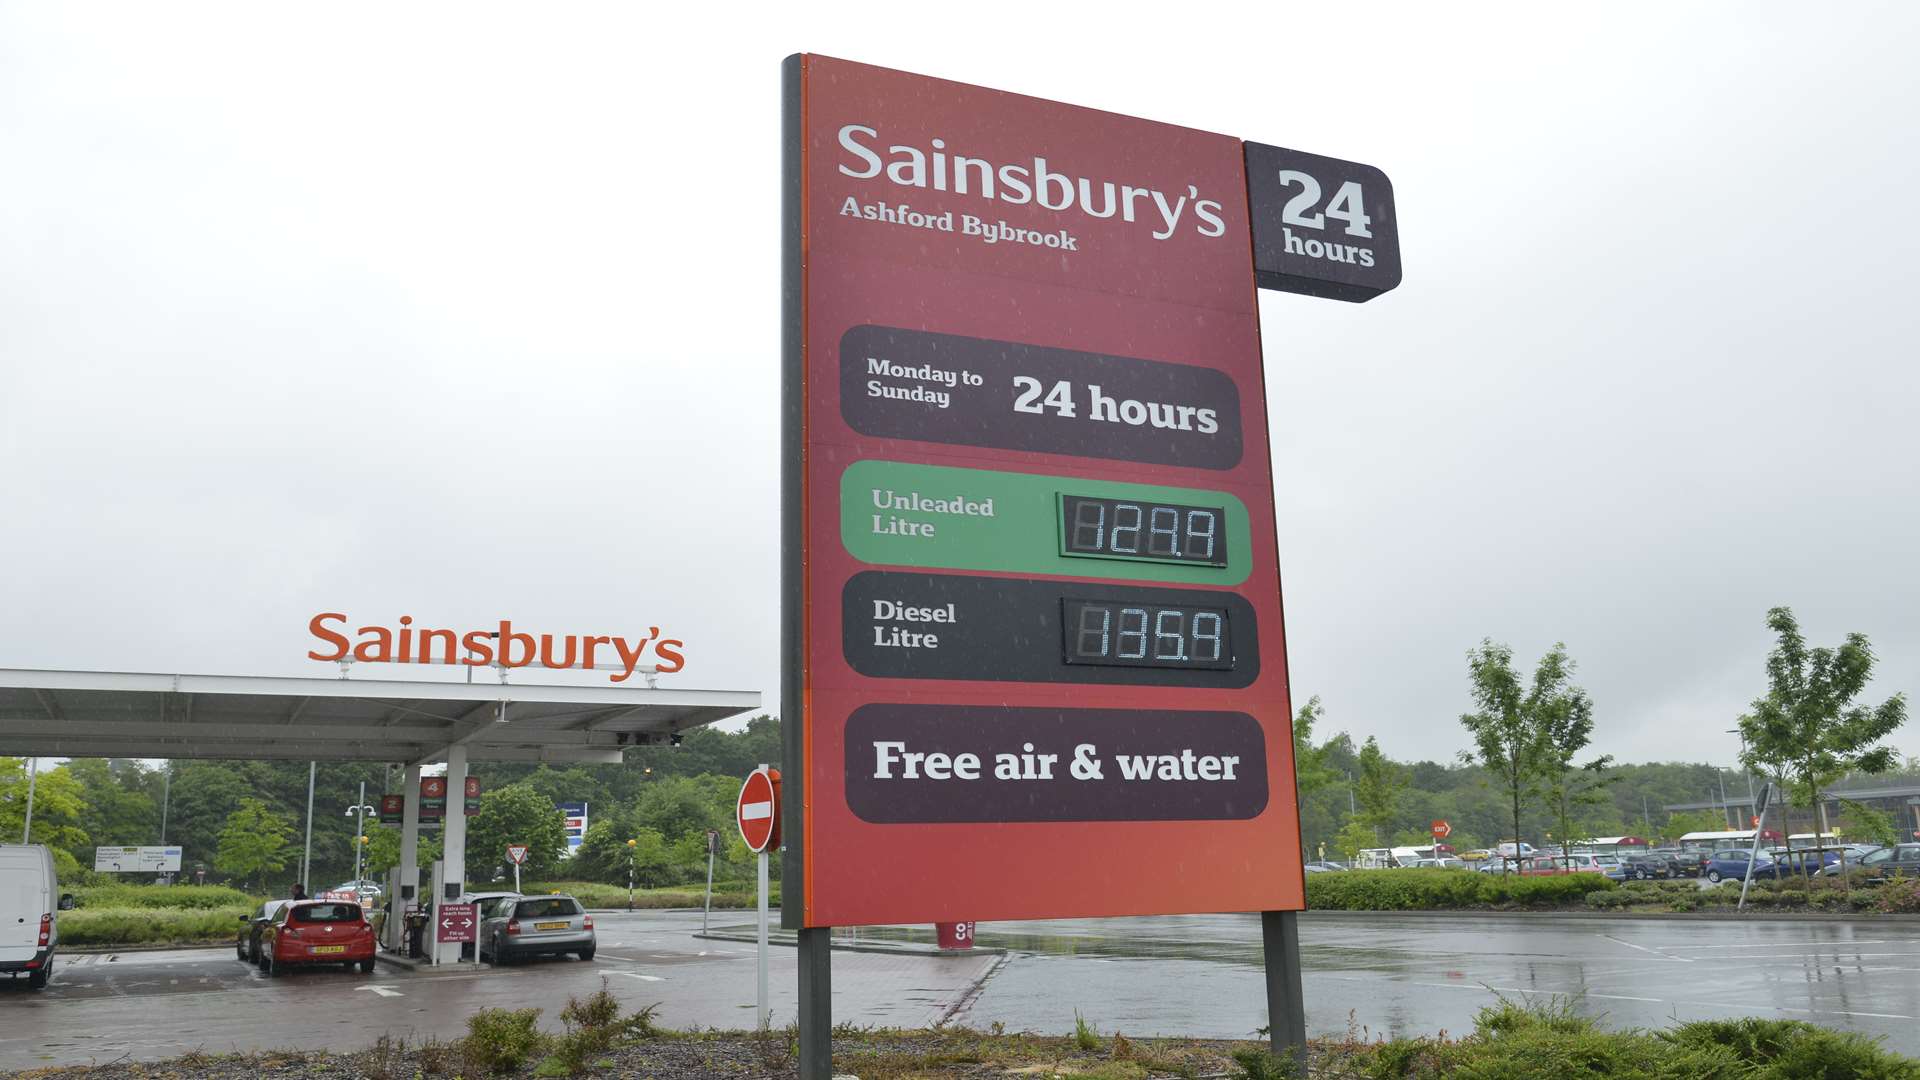 Sainsbuy's Bybrook petrol station is currently closed: library image.